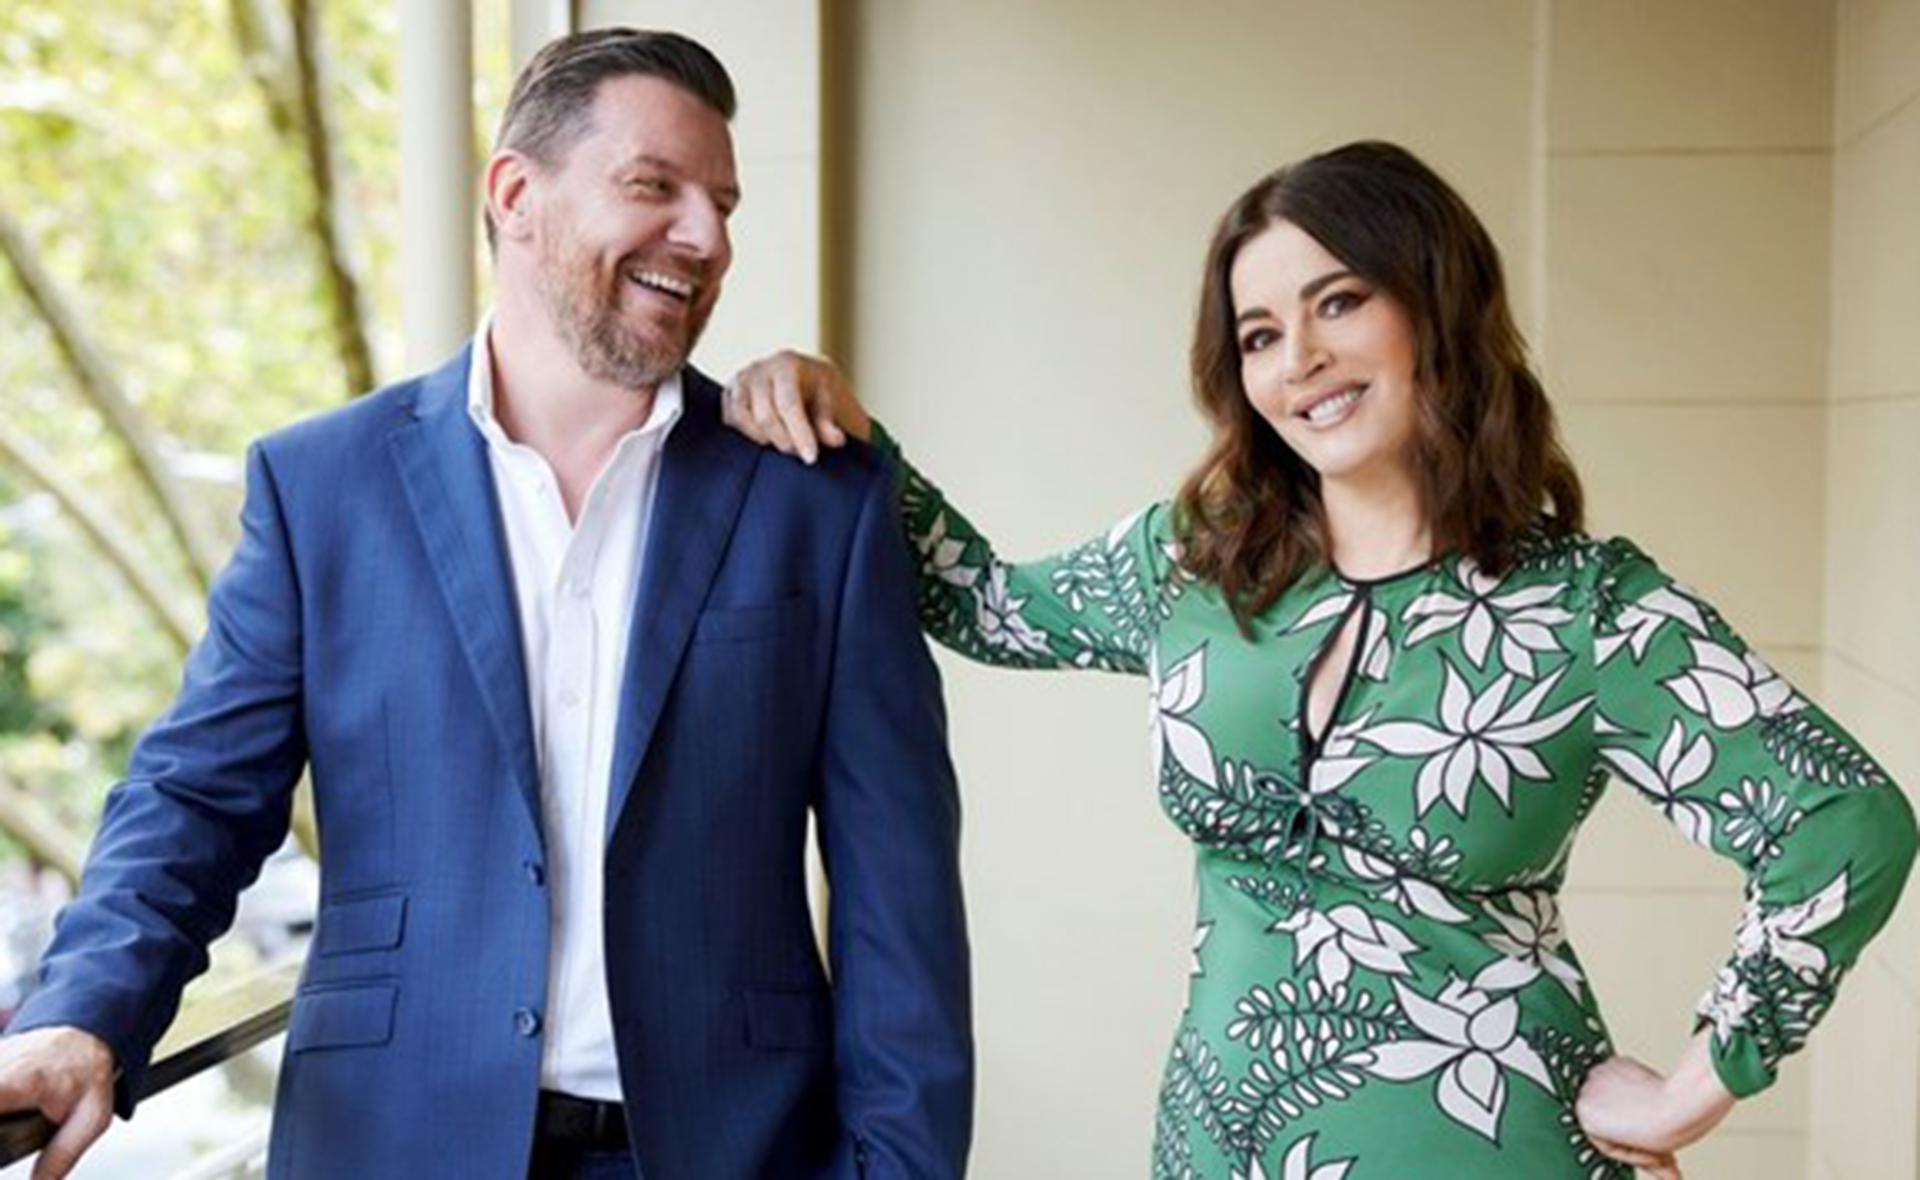 “I’ve come 17,000 kilometres to find Australia’s best home cooks!” We finally have our first look at Nigella Lawson on My Kitchen Rules